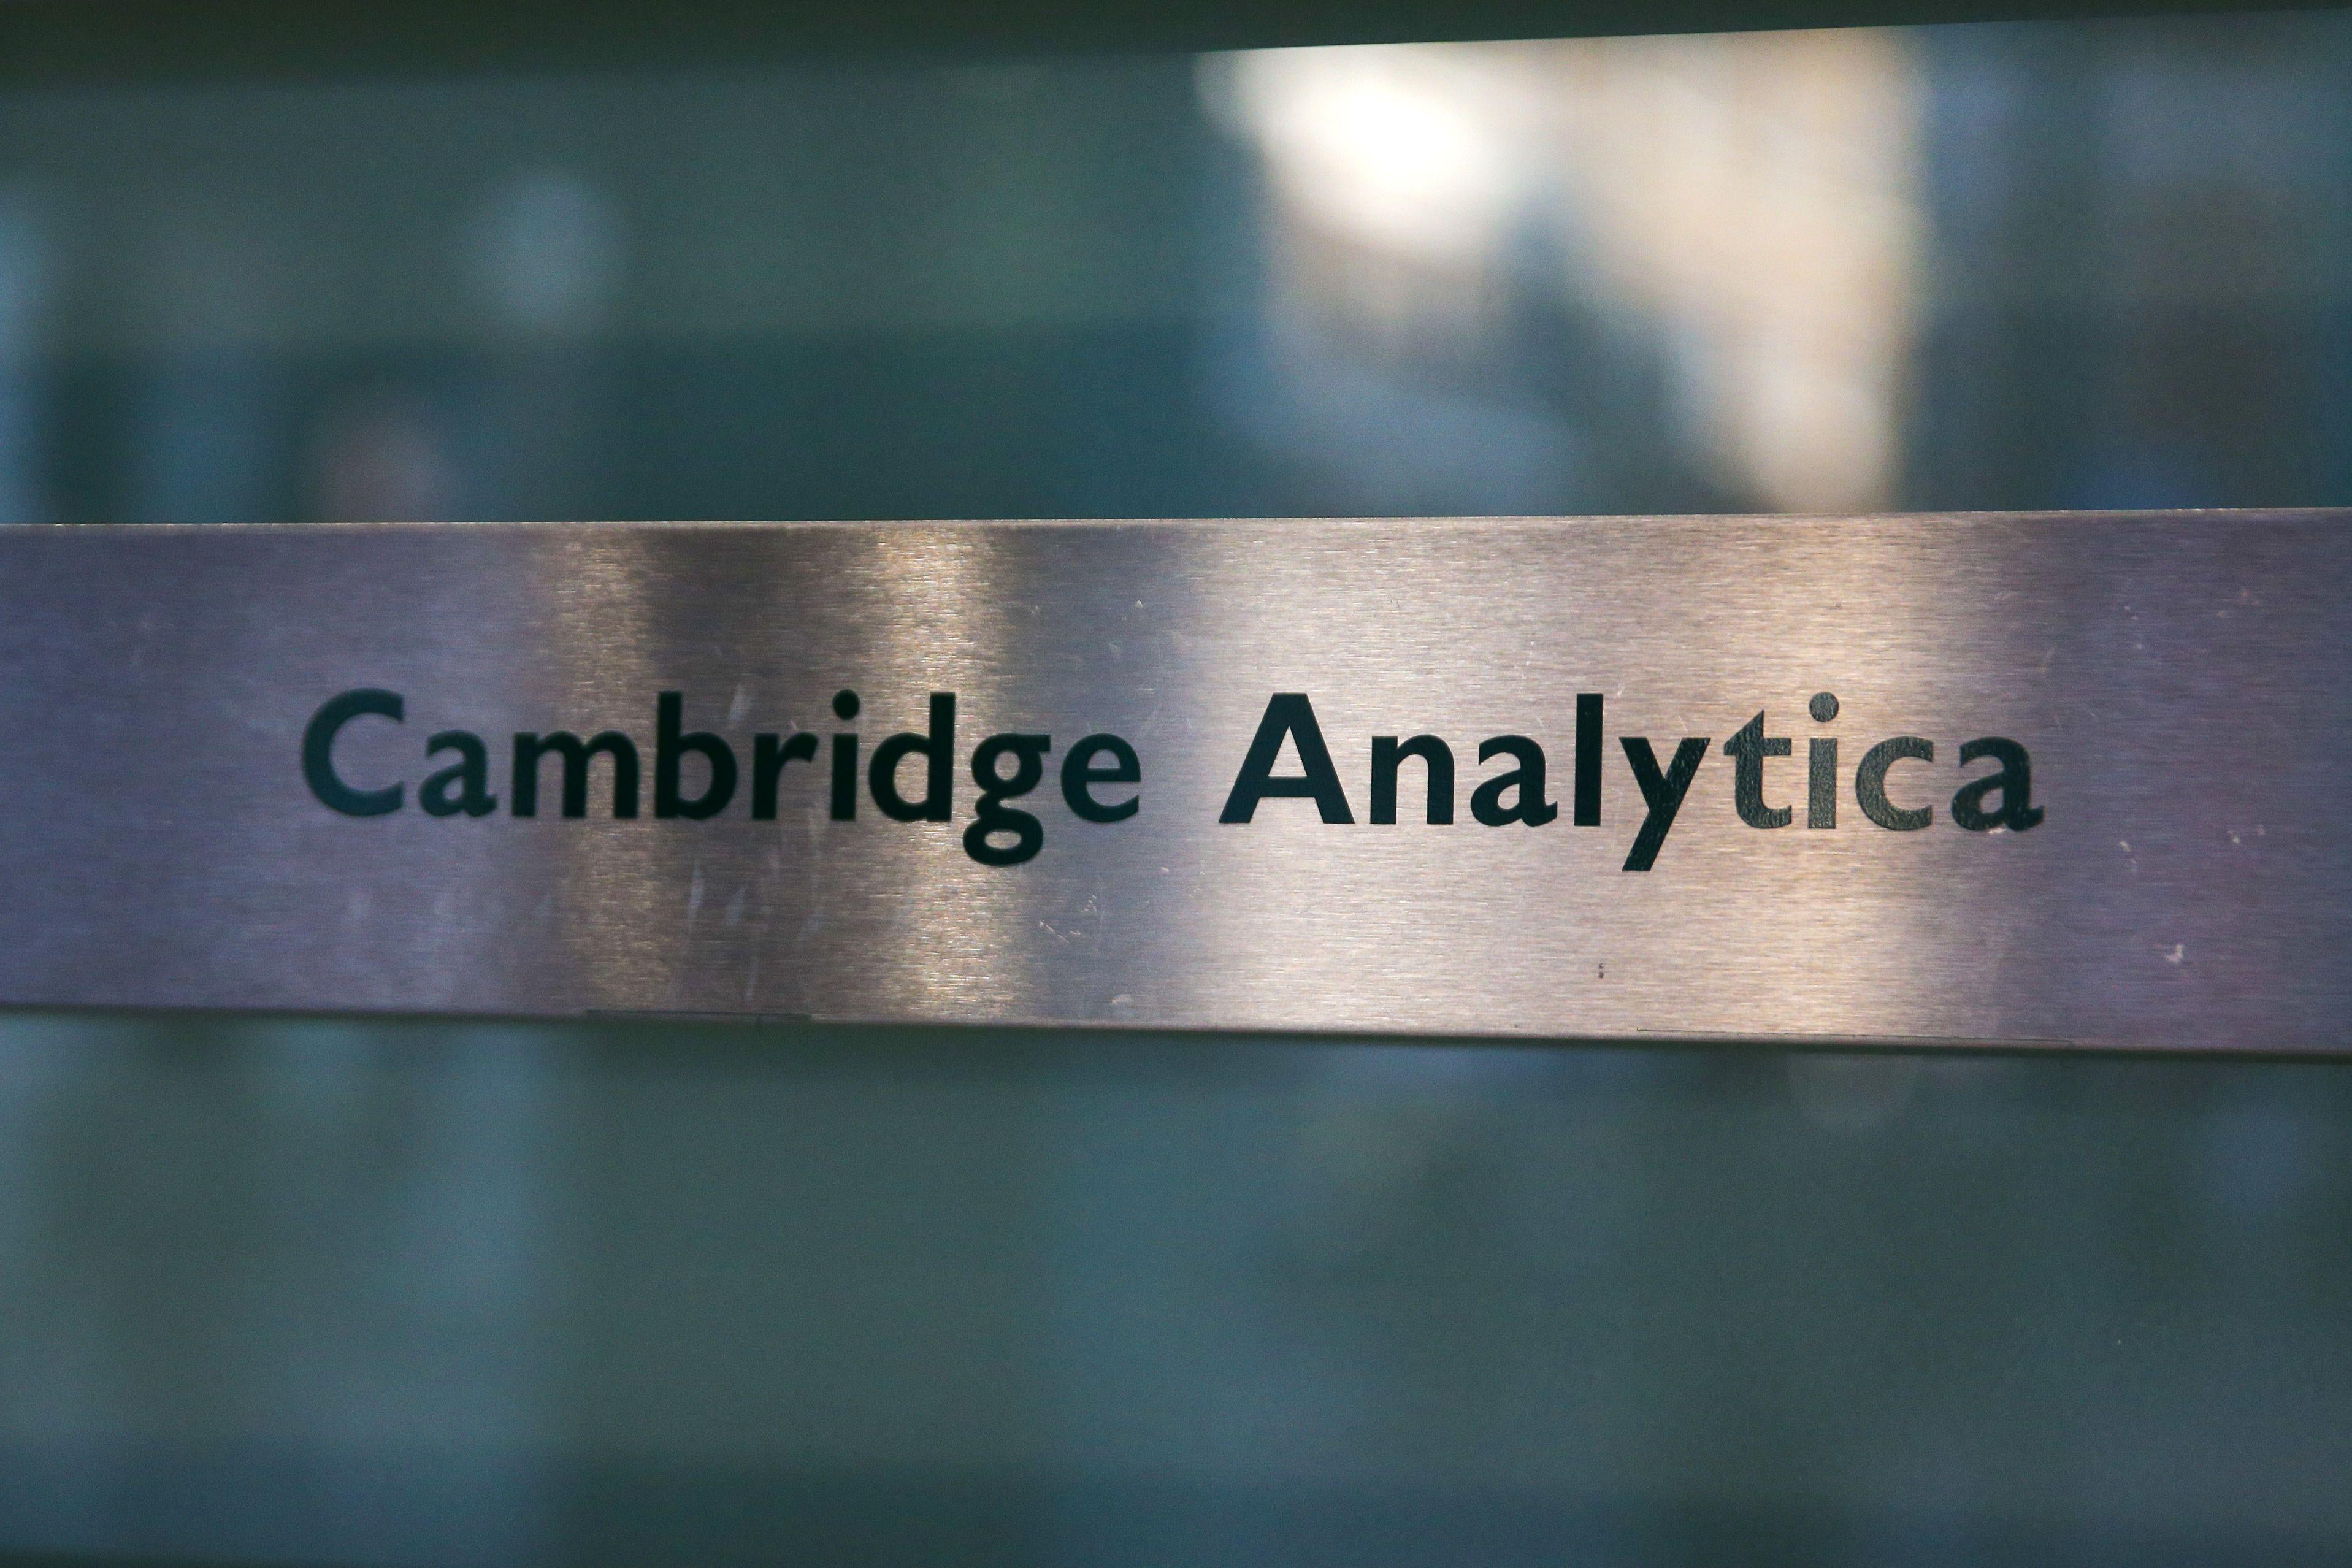 Both Cambridge Analytica and its parent company, SCL, are shutting down. 